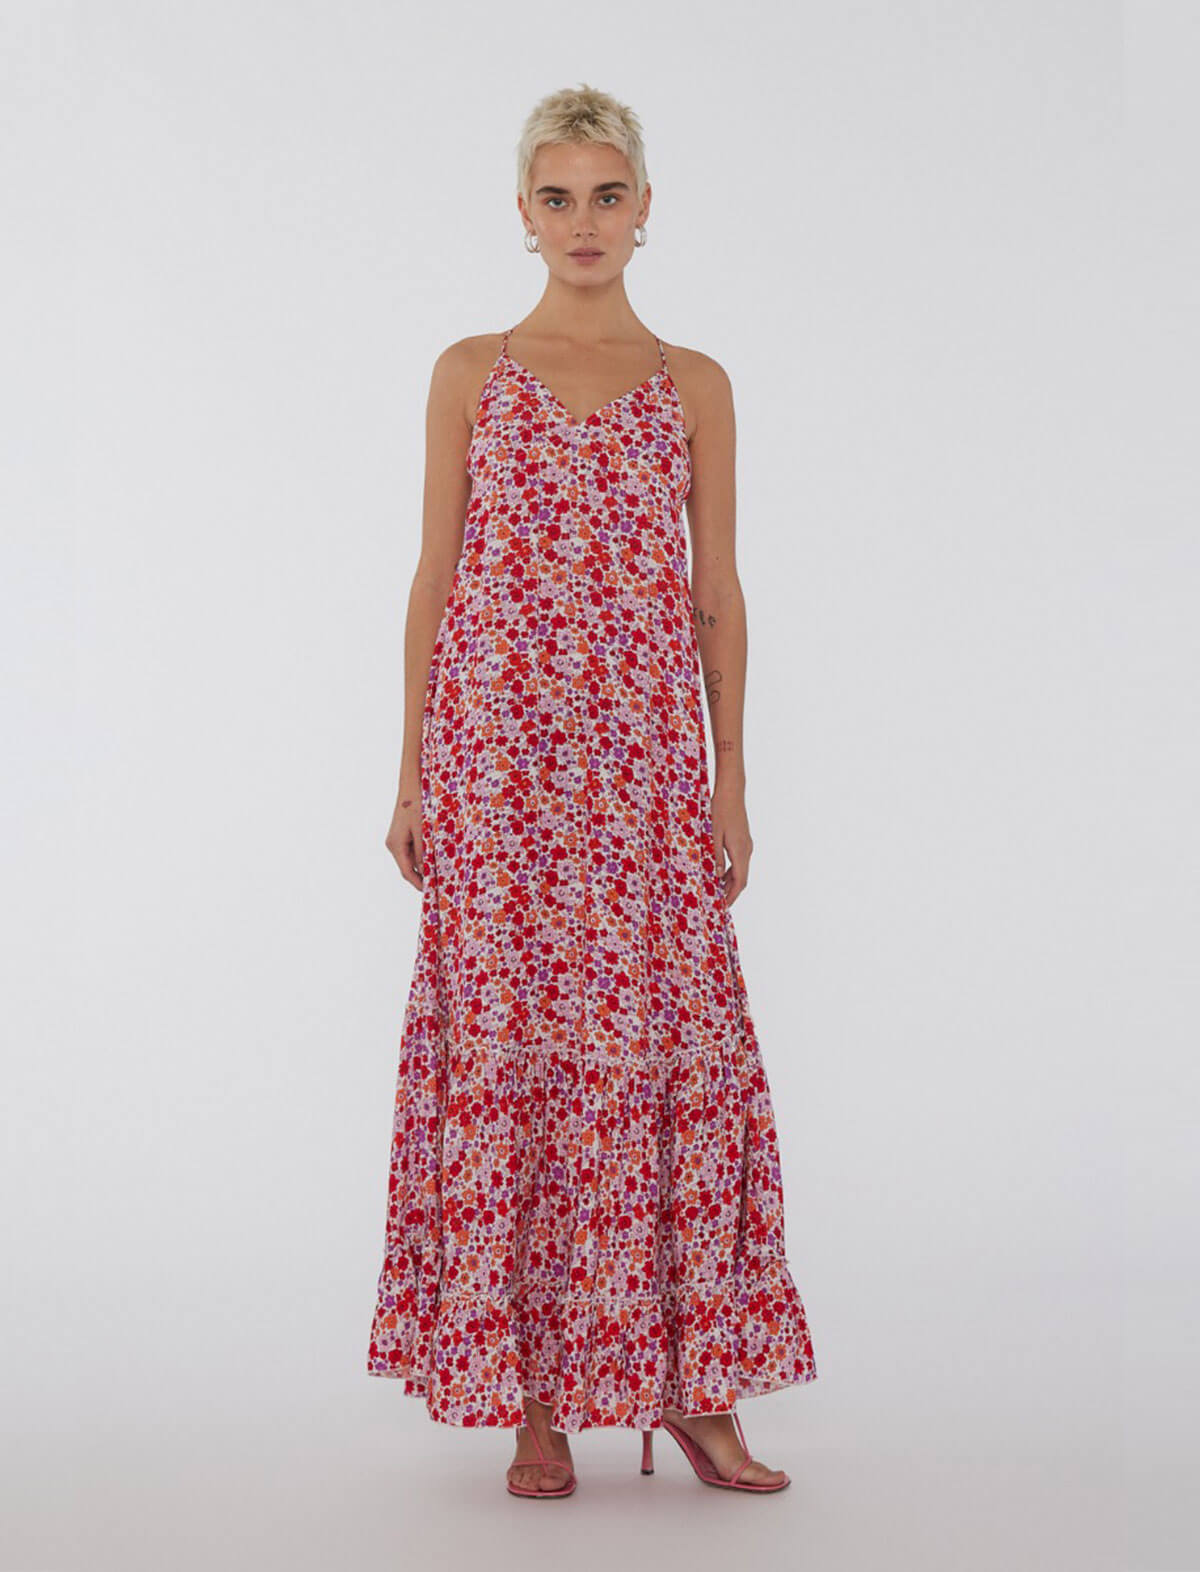 ROTATE SUNDAY 6 Jacquard Maxi Dress in Red Floral Print